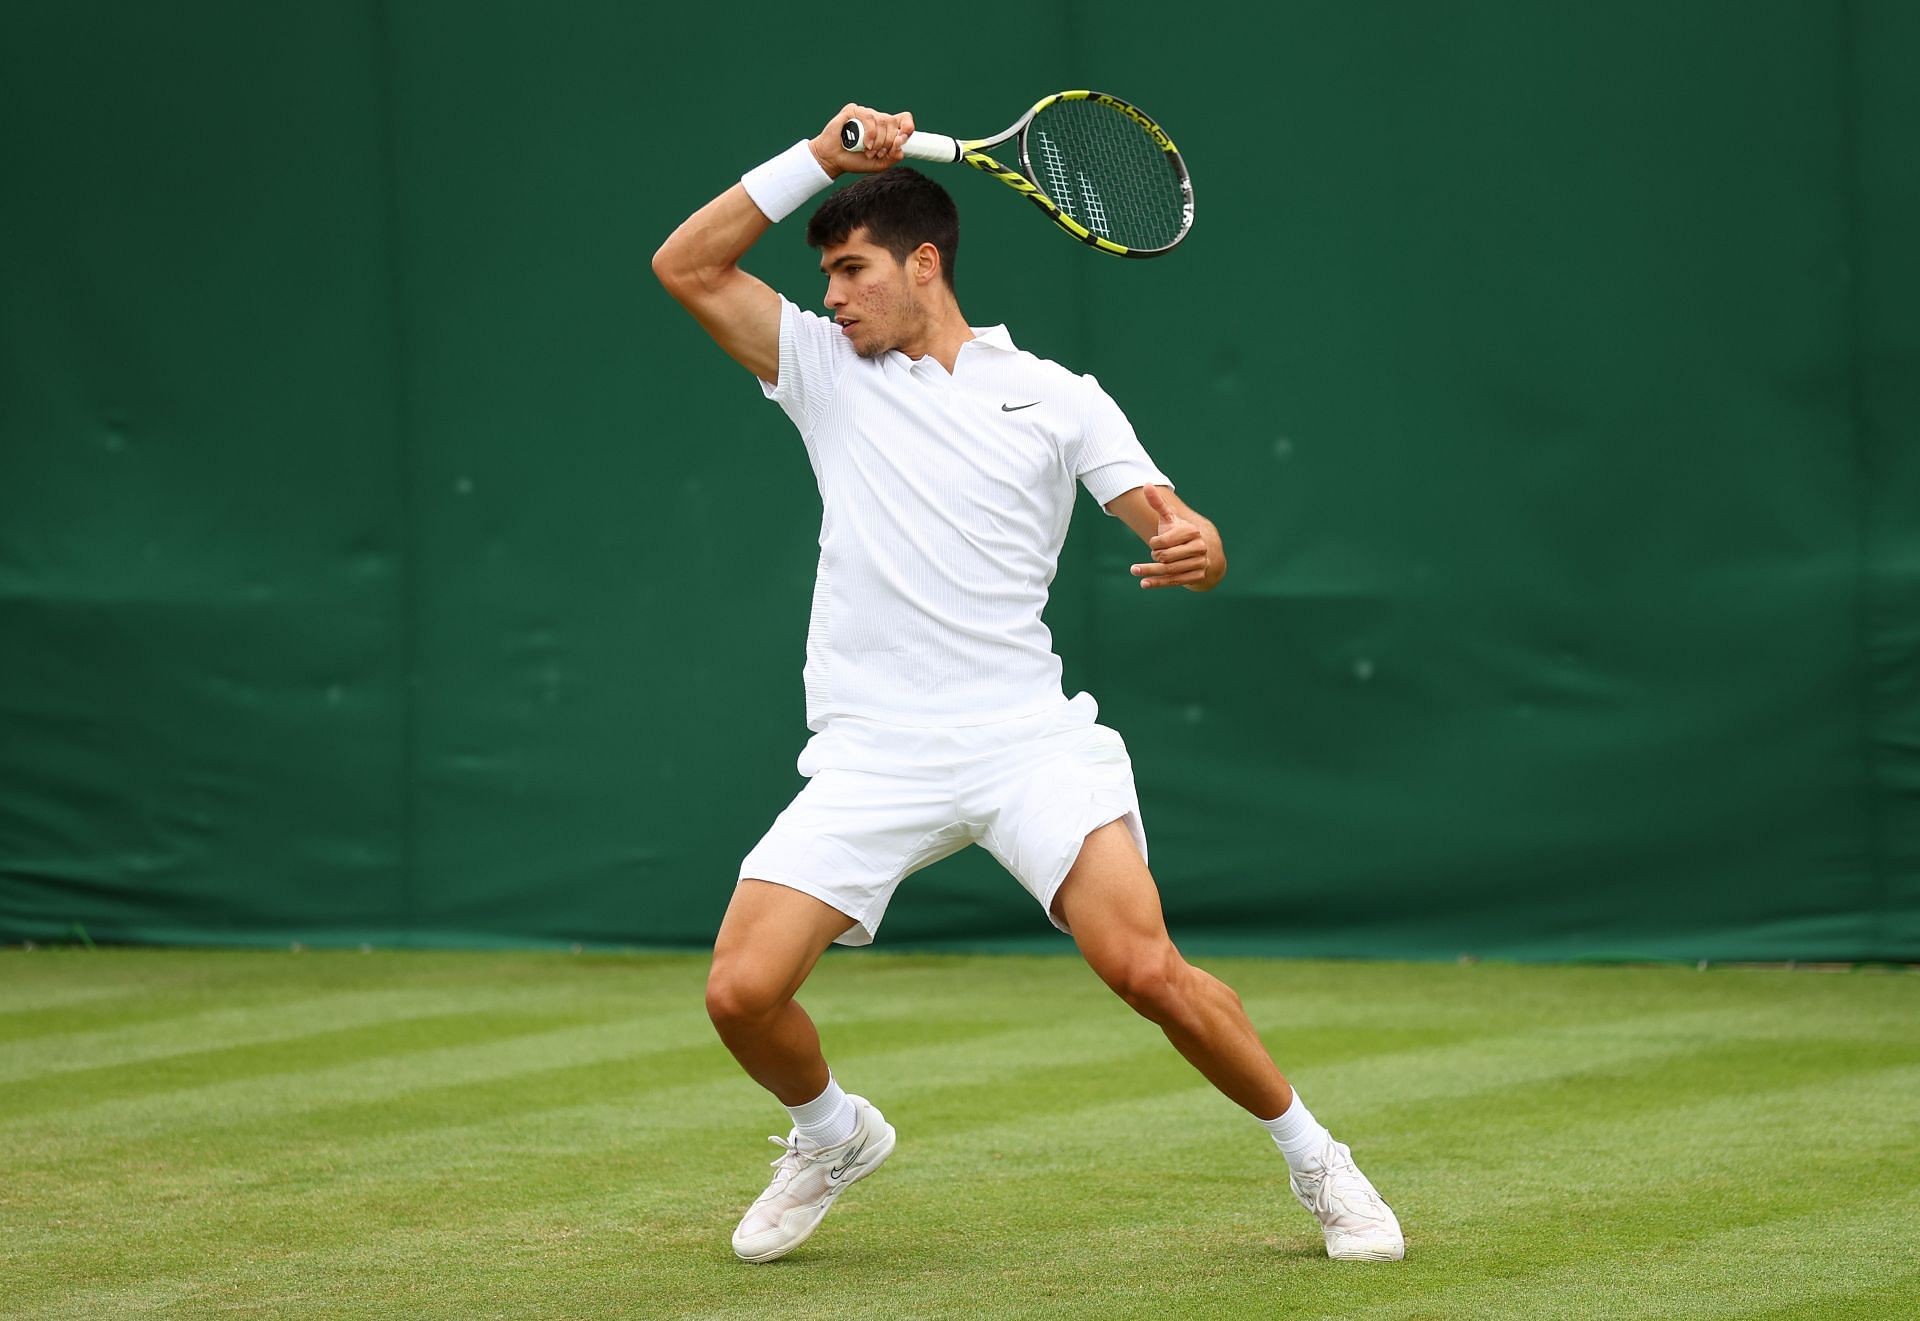 Carlos Alcaraz reached the second round at the 2021 Wimbledon.